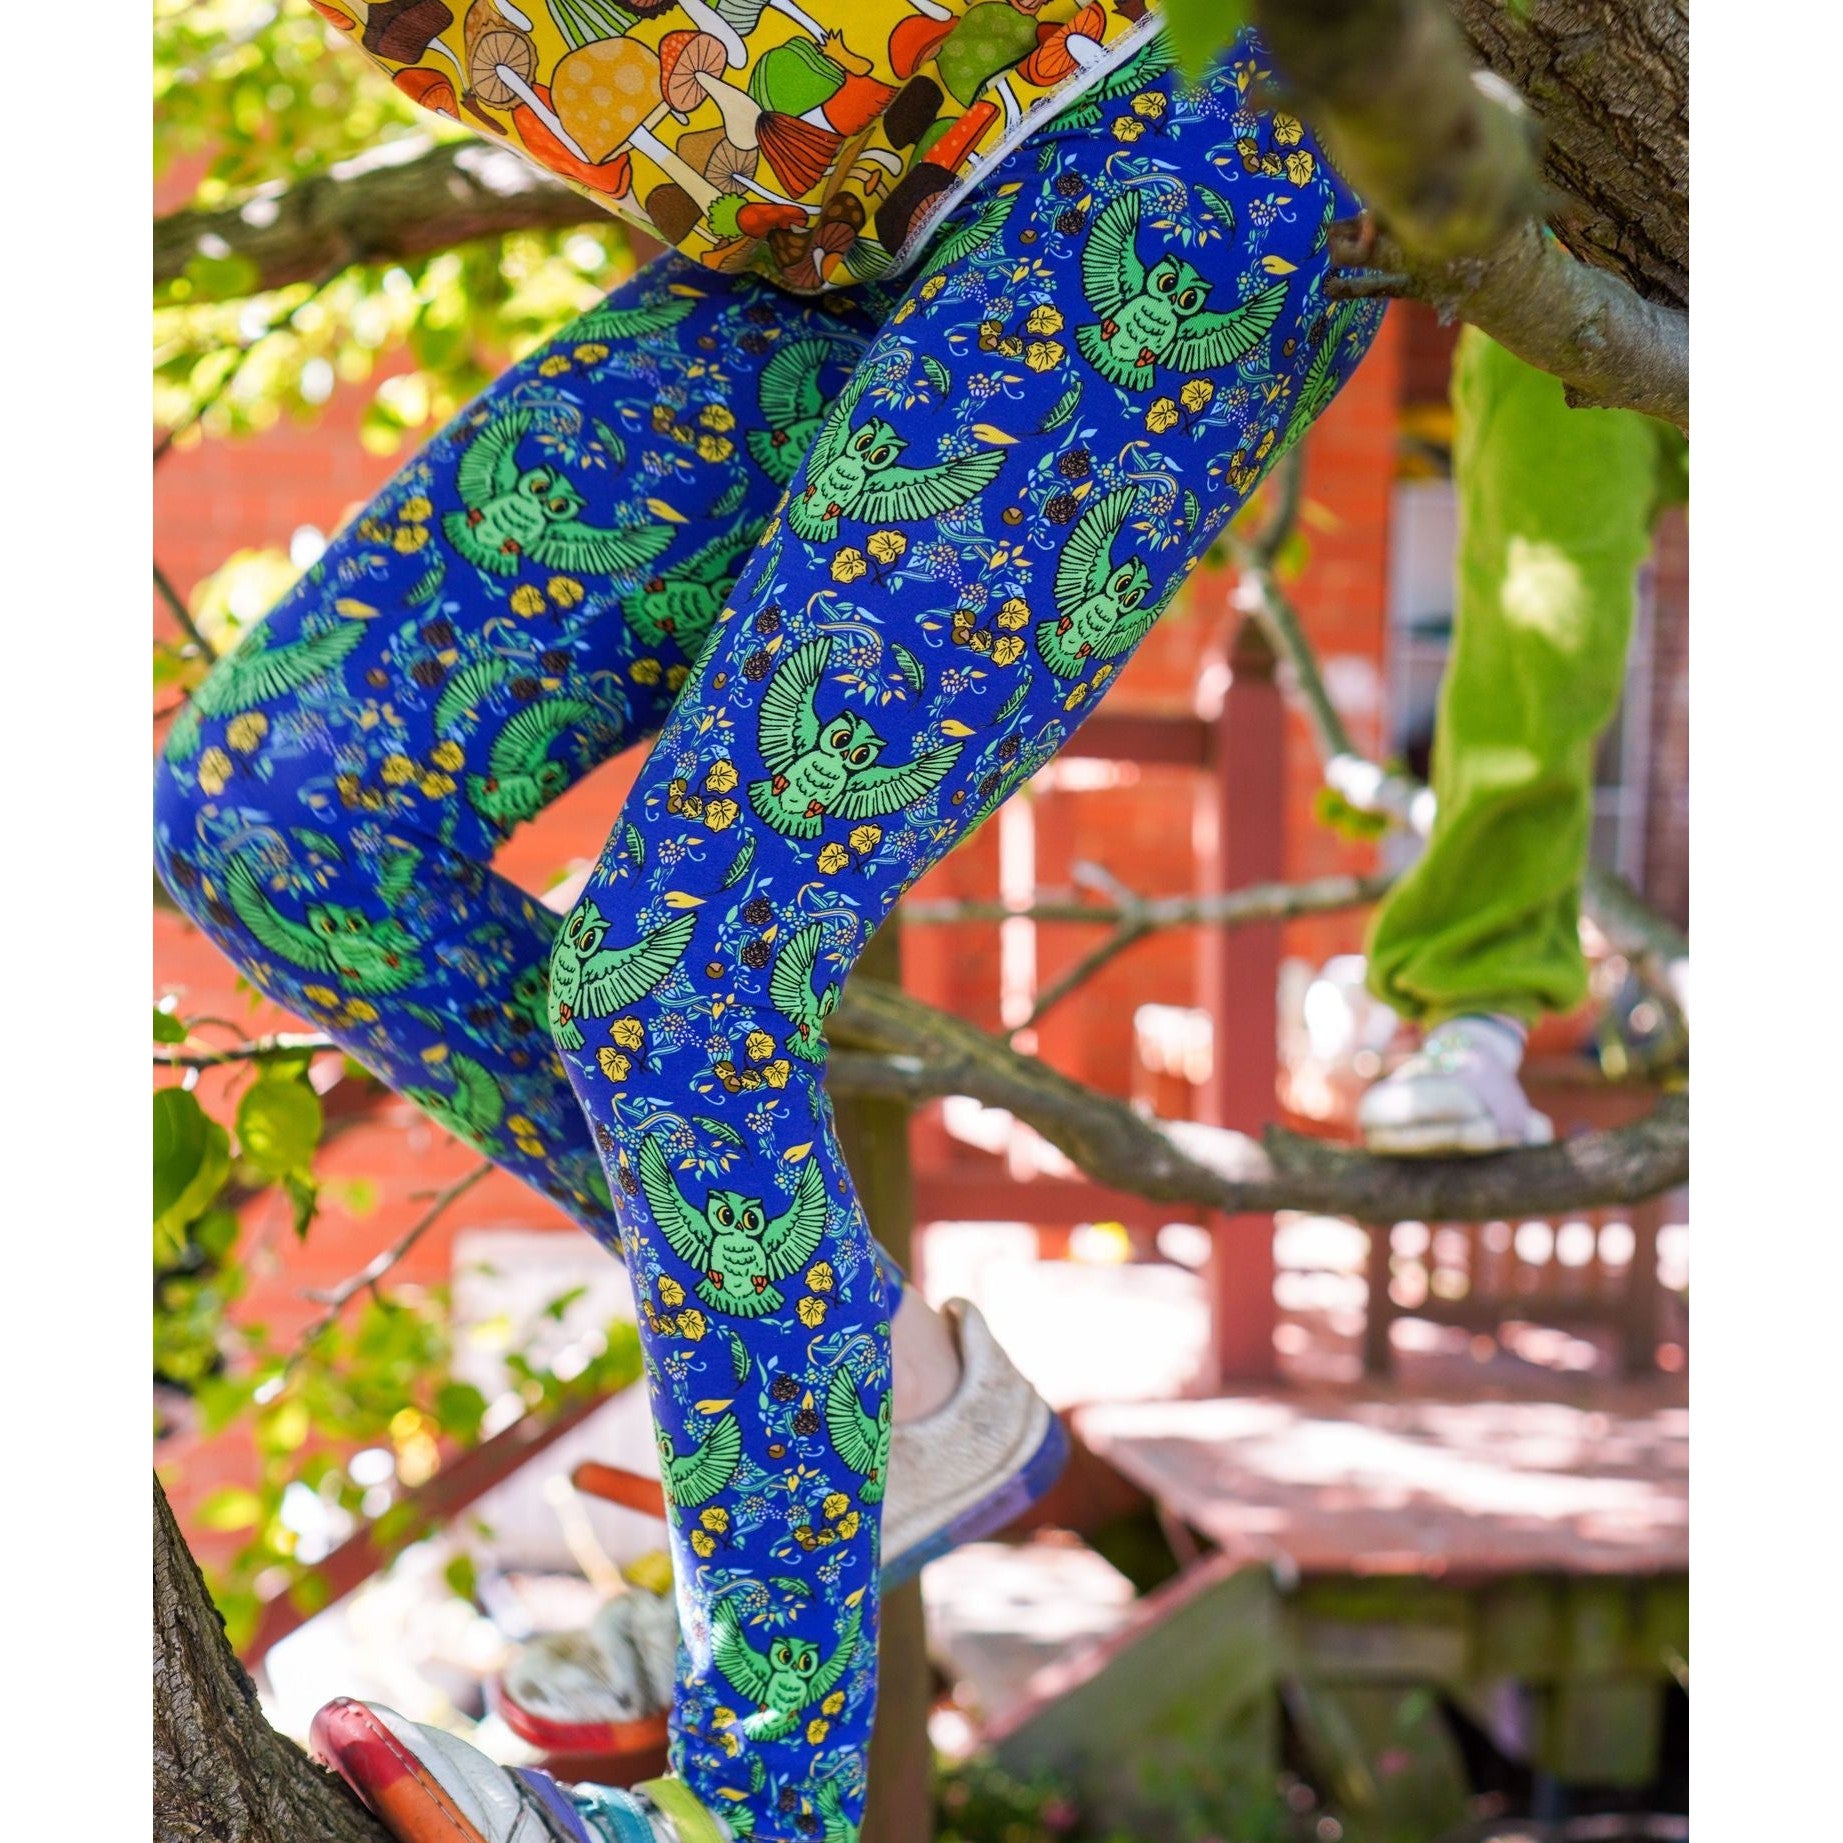 Avalanche Solid Blue Leggings Size L - 23% off